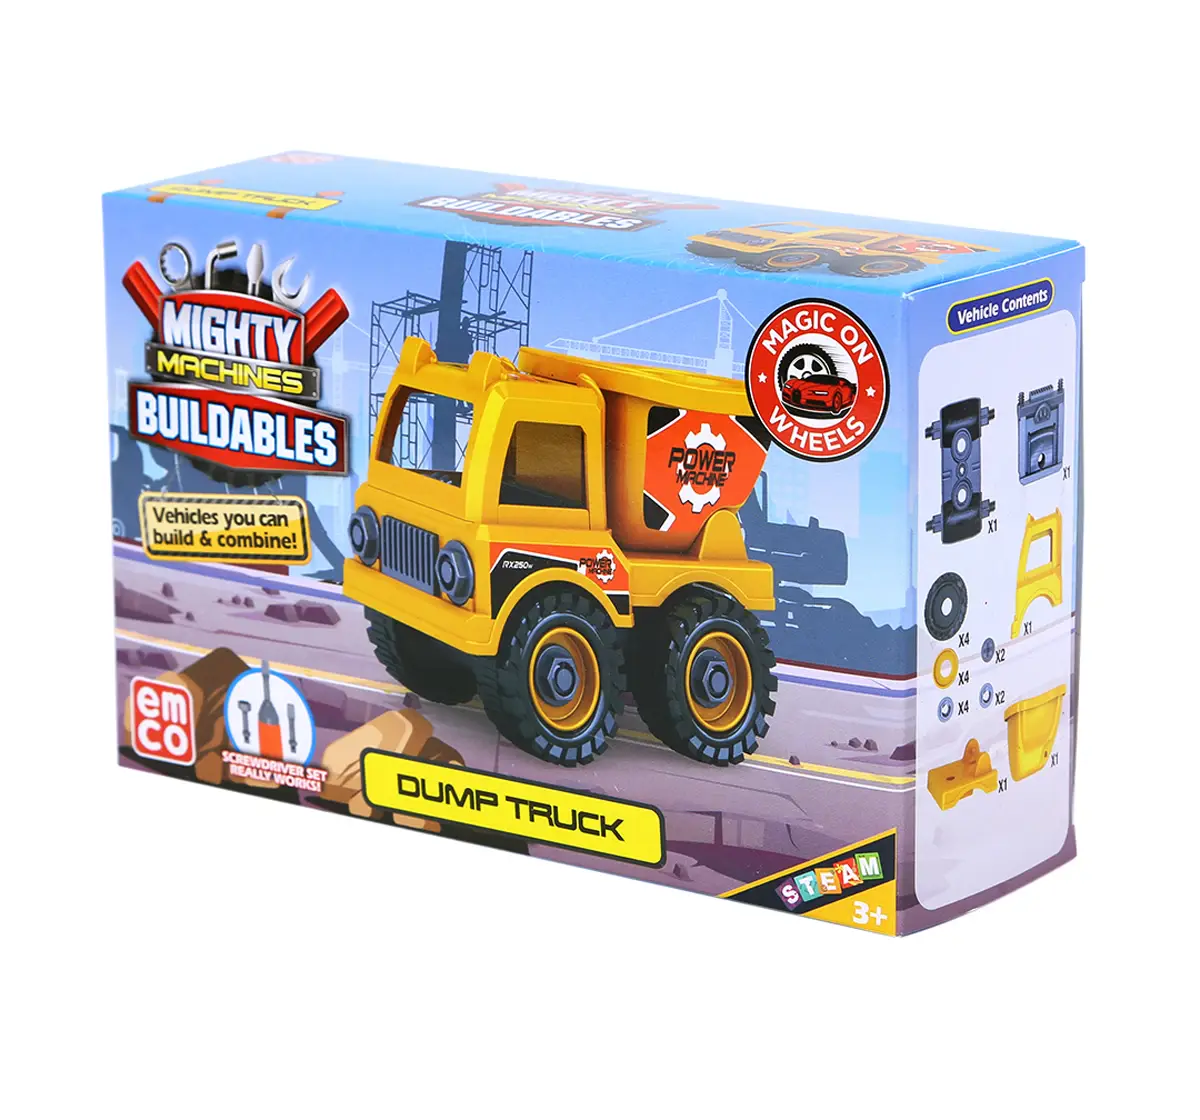 Mighty Machines Buildables Dump Truck